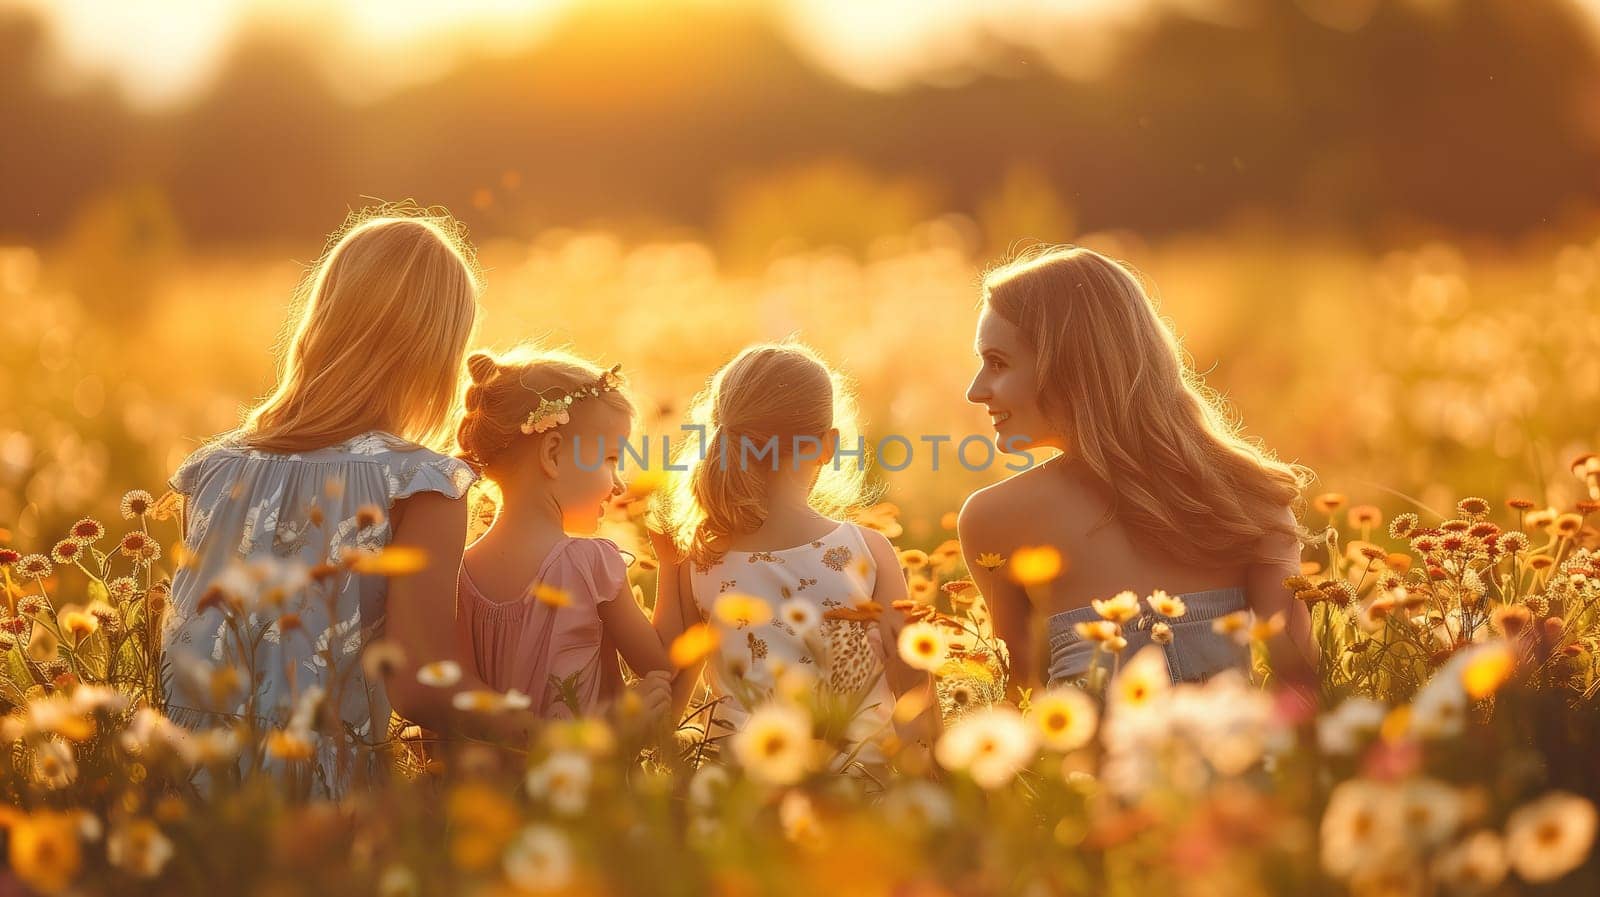 A group of young girls are sitting in a colorful field of flowers on International Mothers Day. They are chatting and laughing, enjoying the vibrant blooms around them.